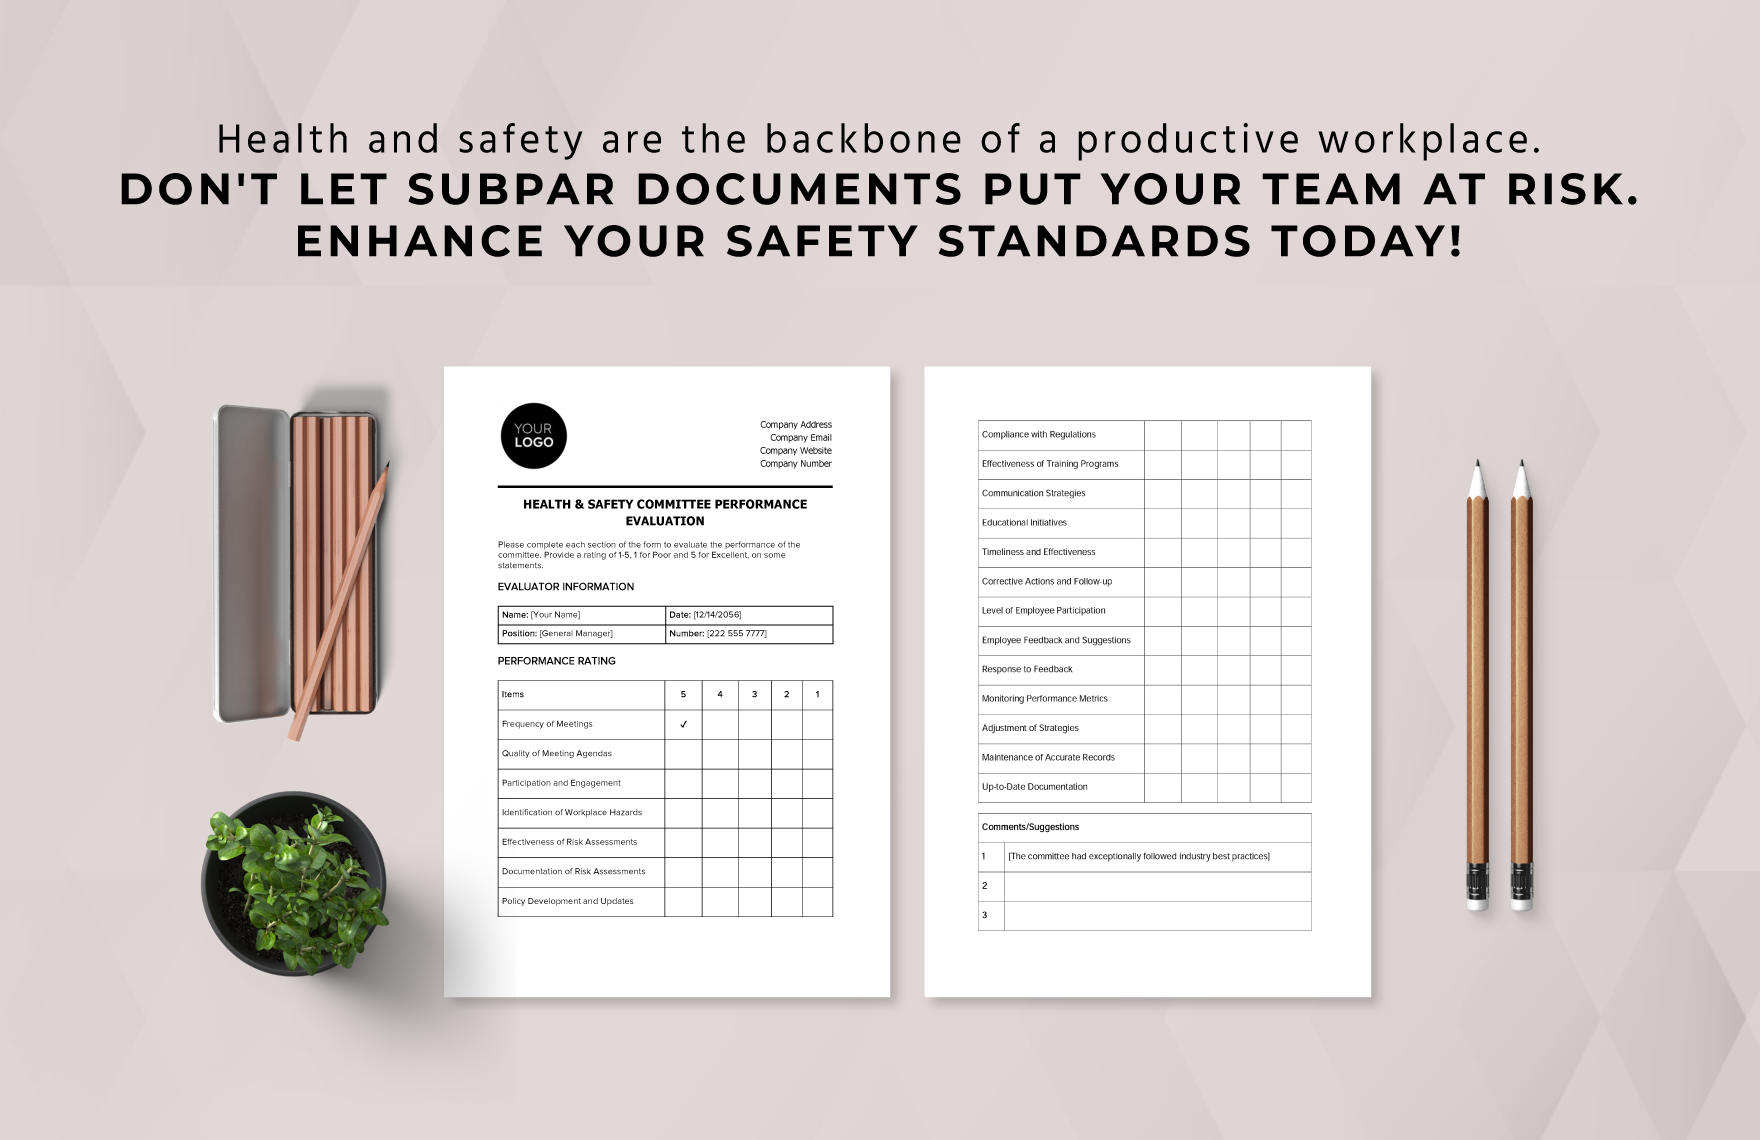 Health & Safety Committee Performance Evaluation Template